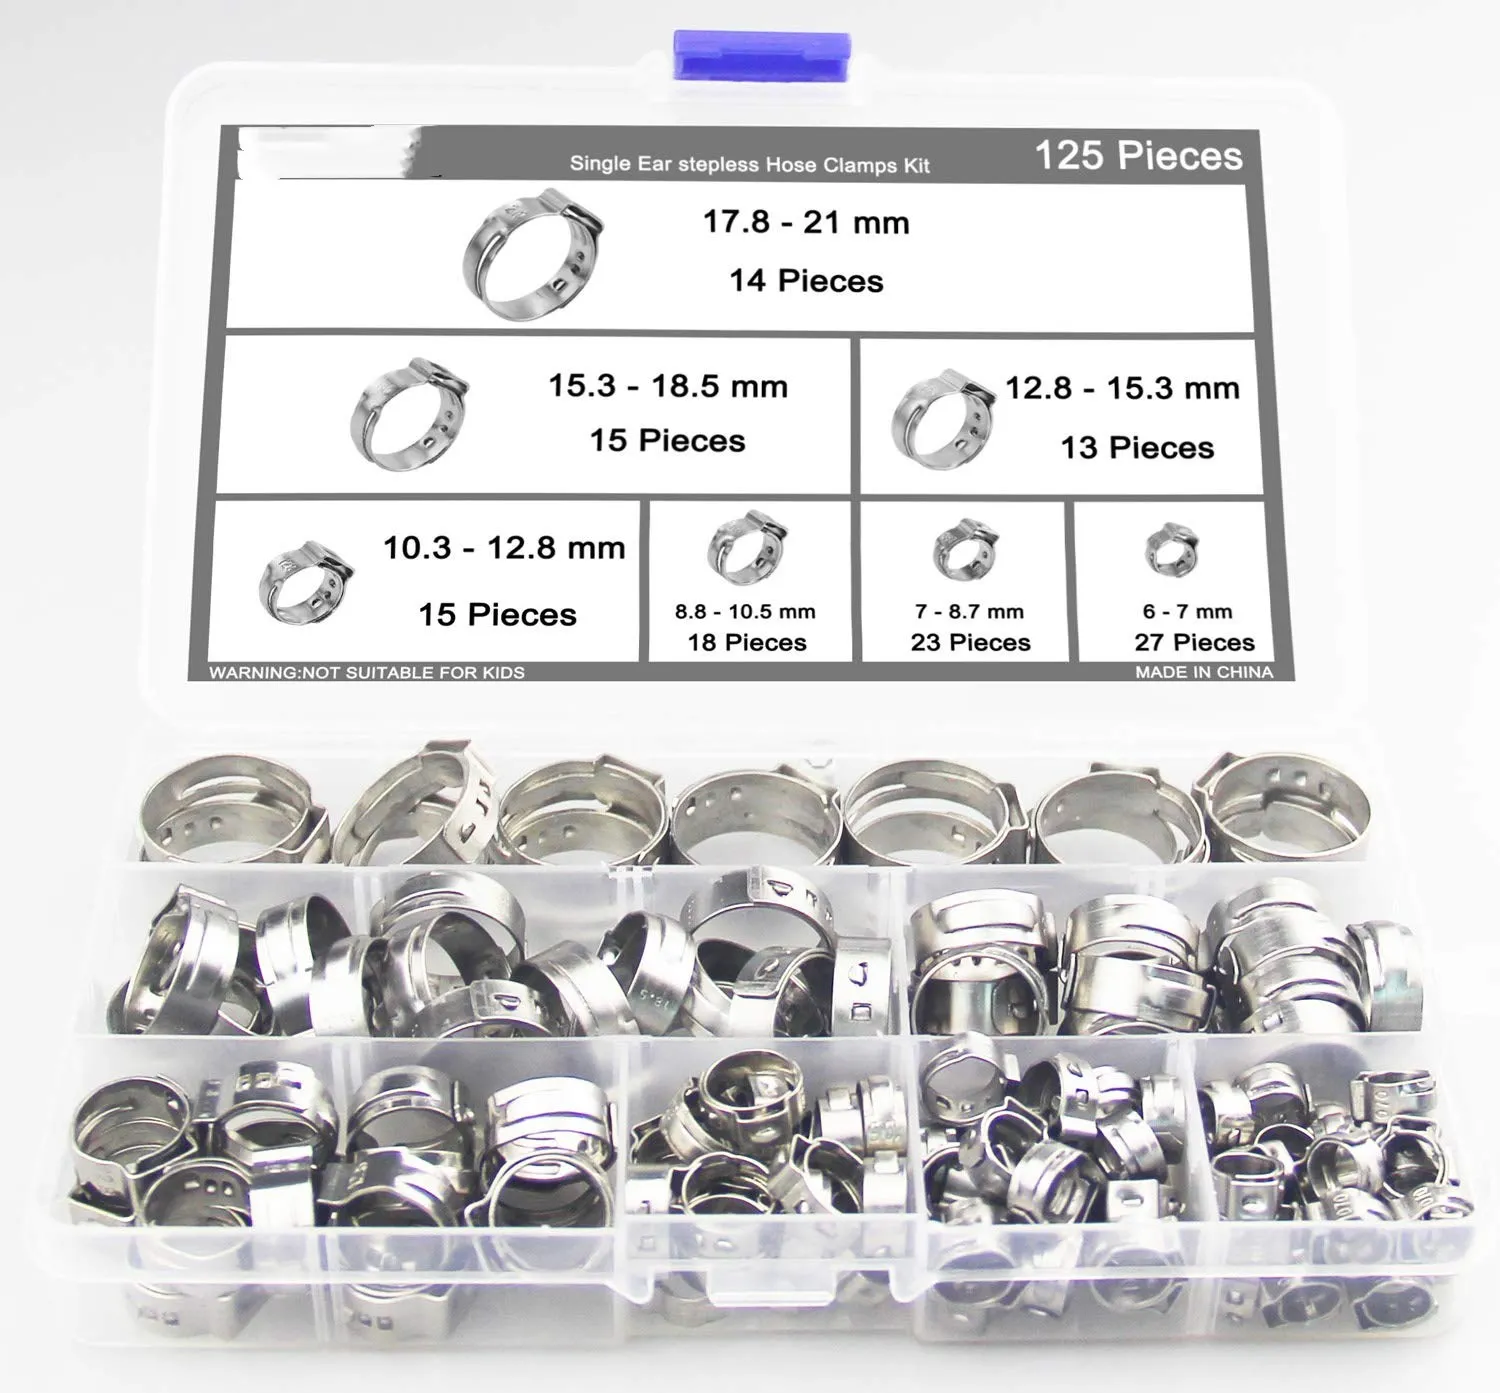 

125Pcs 304 Stainless Steel Single Ear Stepless Hose Clamps Clamp Assortment Kit Crimp Pinch Rings for Securing Pipe Hoses